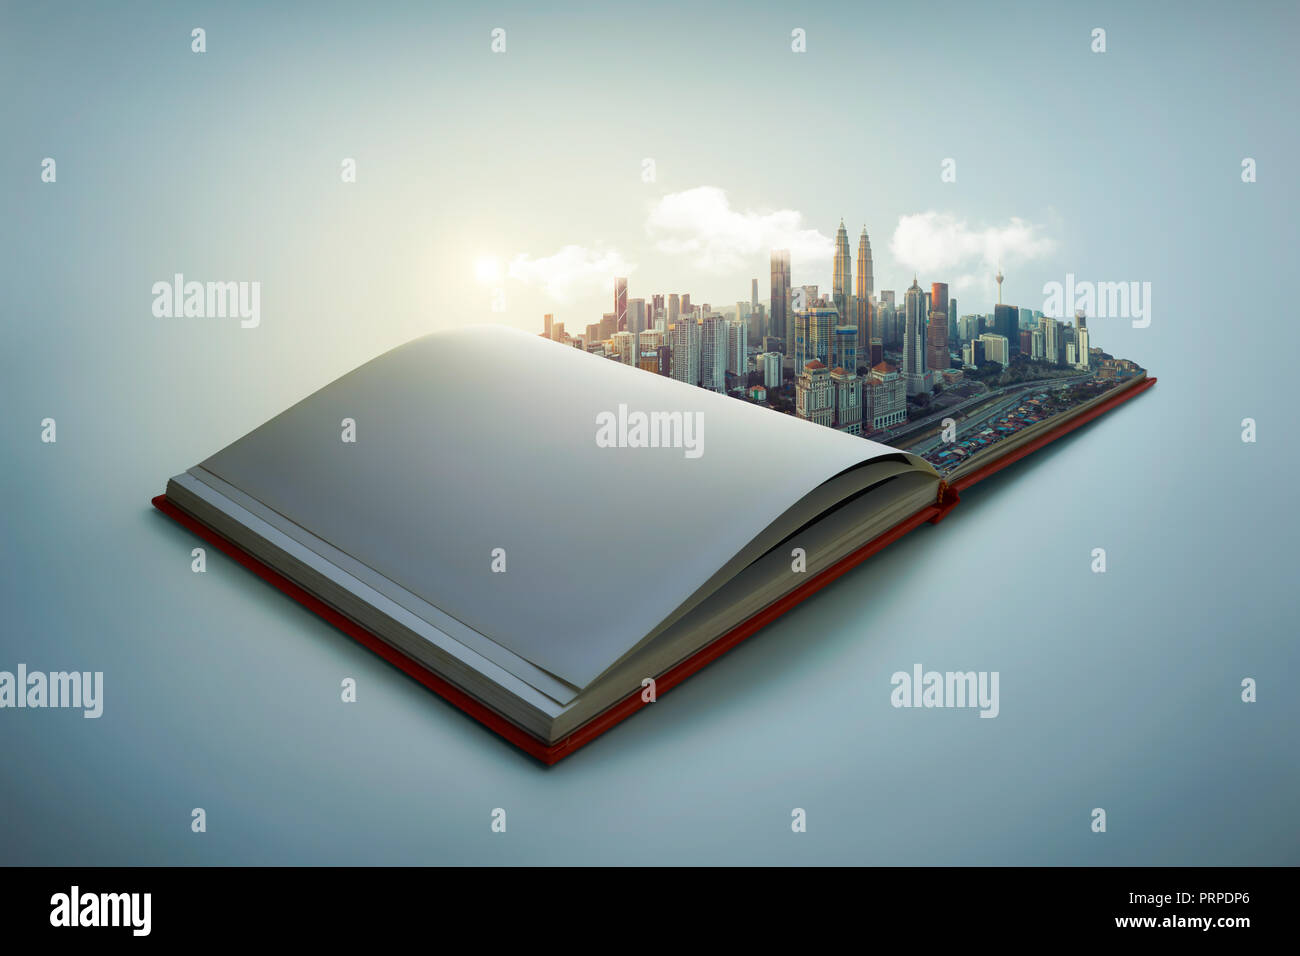 Early morning beautiful scene of modern city skyline pop up in the open book pages. Stock Photo